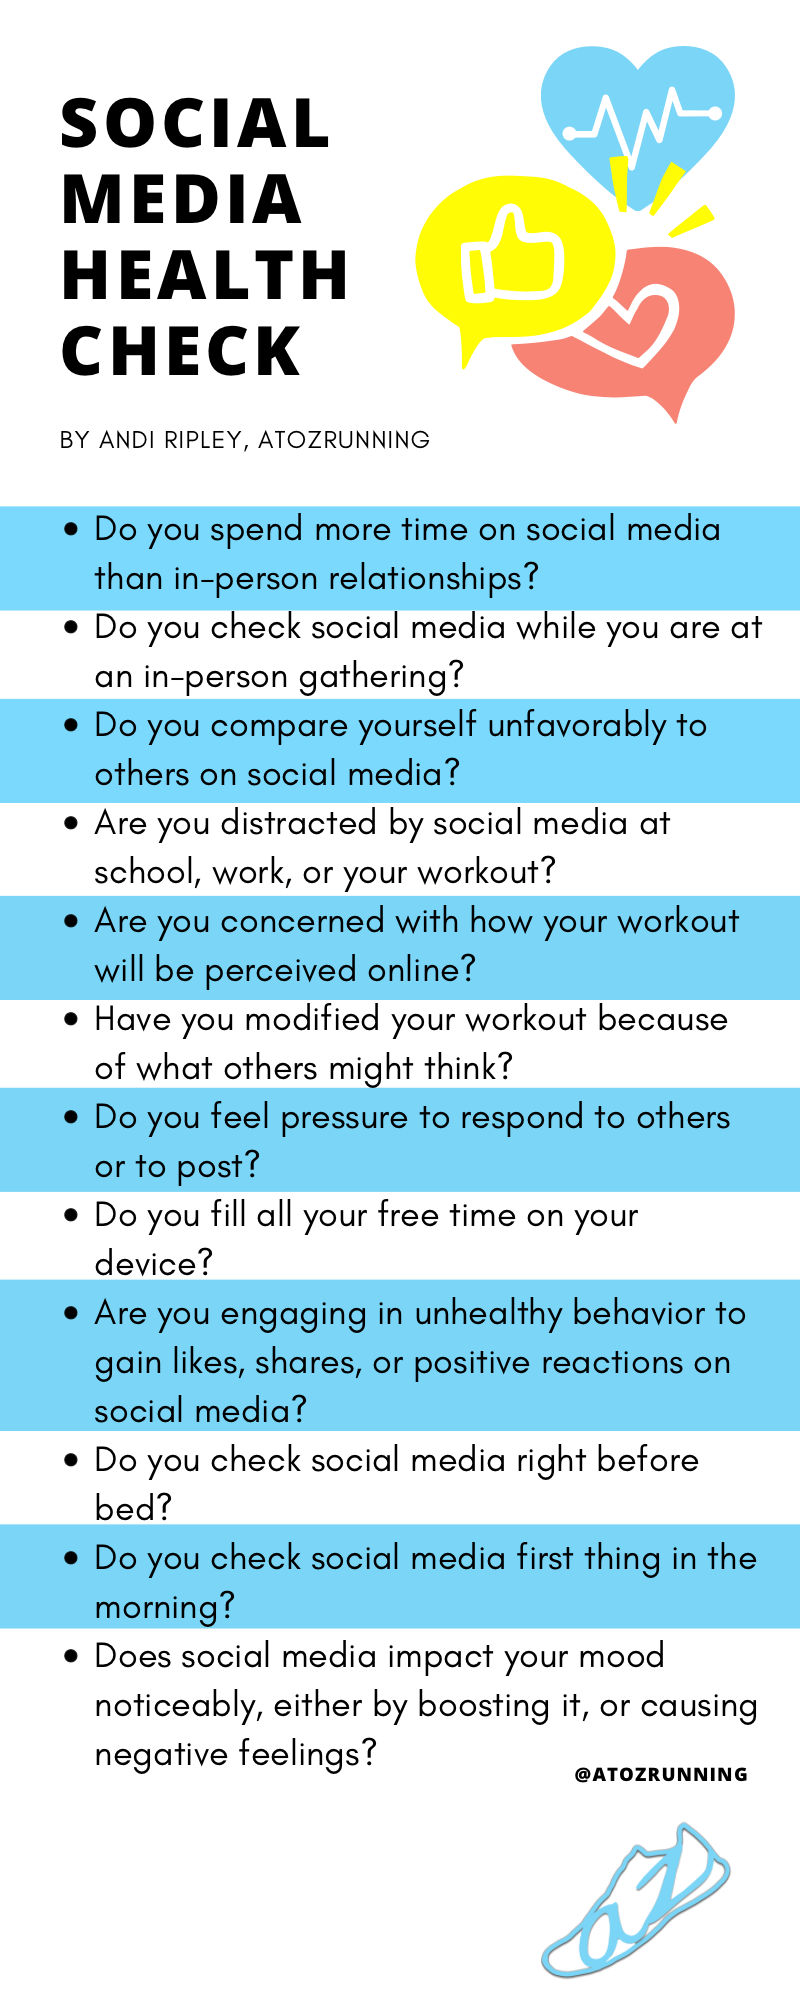 Do you spend more time on social media than in-person relationships? Do you check social media while you are at an in-person gathering? Do you compare yourself unfavorably to others on social media? Are you distracted by social media at school, work, or your workout? Are you concerned with how your workout will be perceived online? Have you modified your workout because of what others might think? Do you feel pressure to respond to others or to post? Do you fill all your free time on your device?  Are you engaging in unhealthy behavior to gain likes, shares, or positive reactions on social media? Do you check social media right before bed? Do you check social media first thing in the morning? Does social media impact your mood noticeably, either by boosting it, or causing negative feelings?